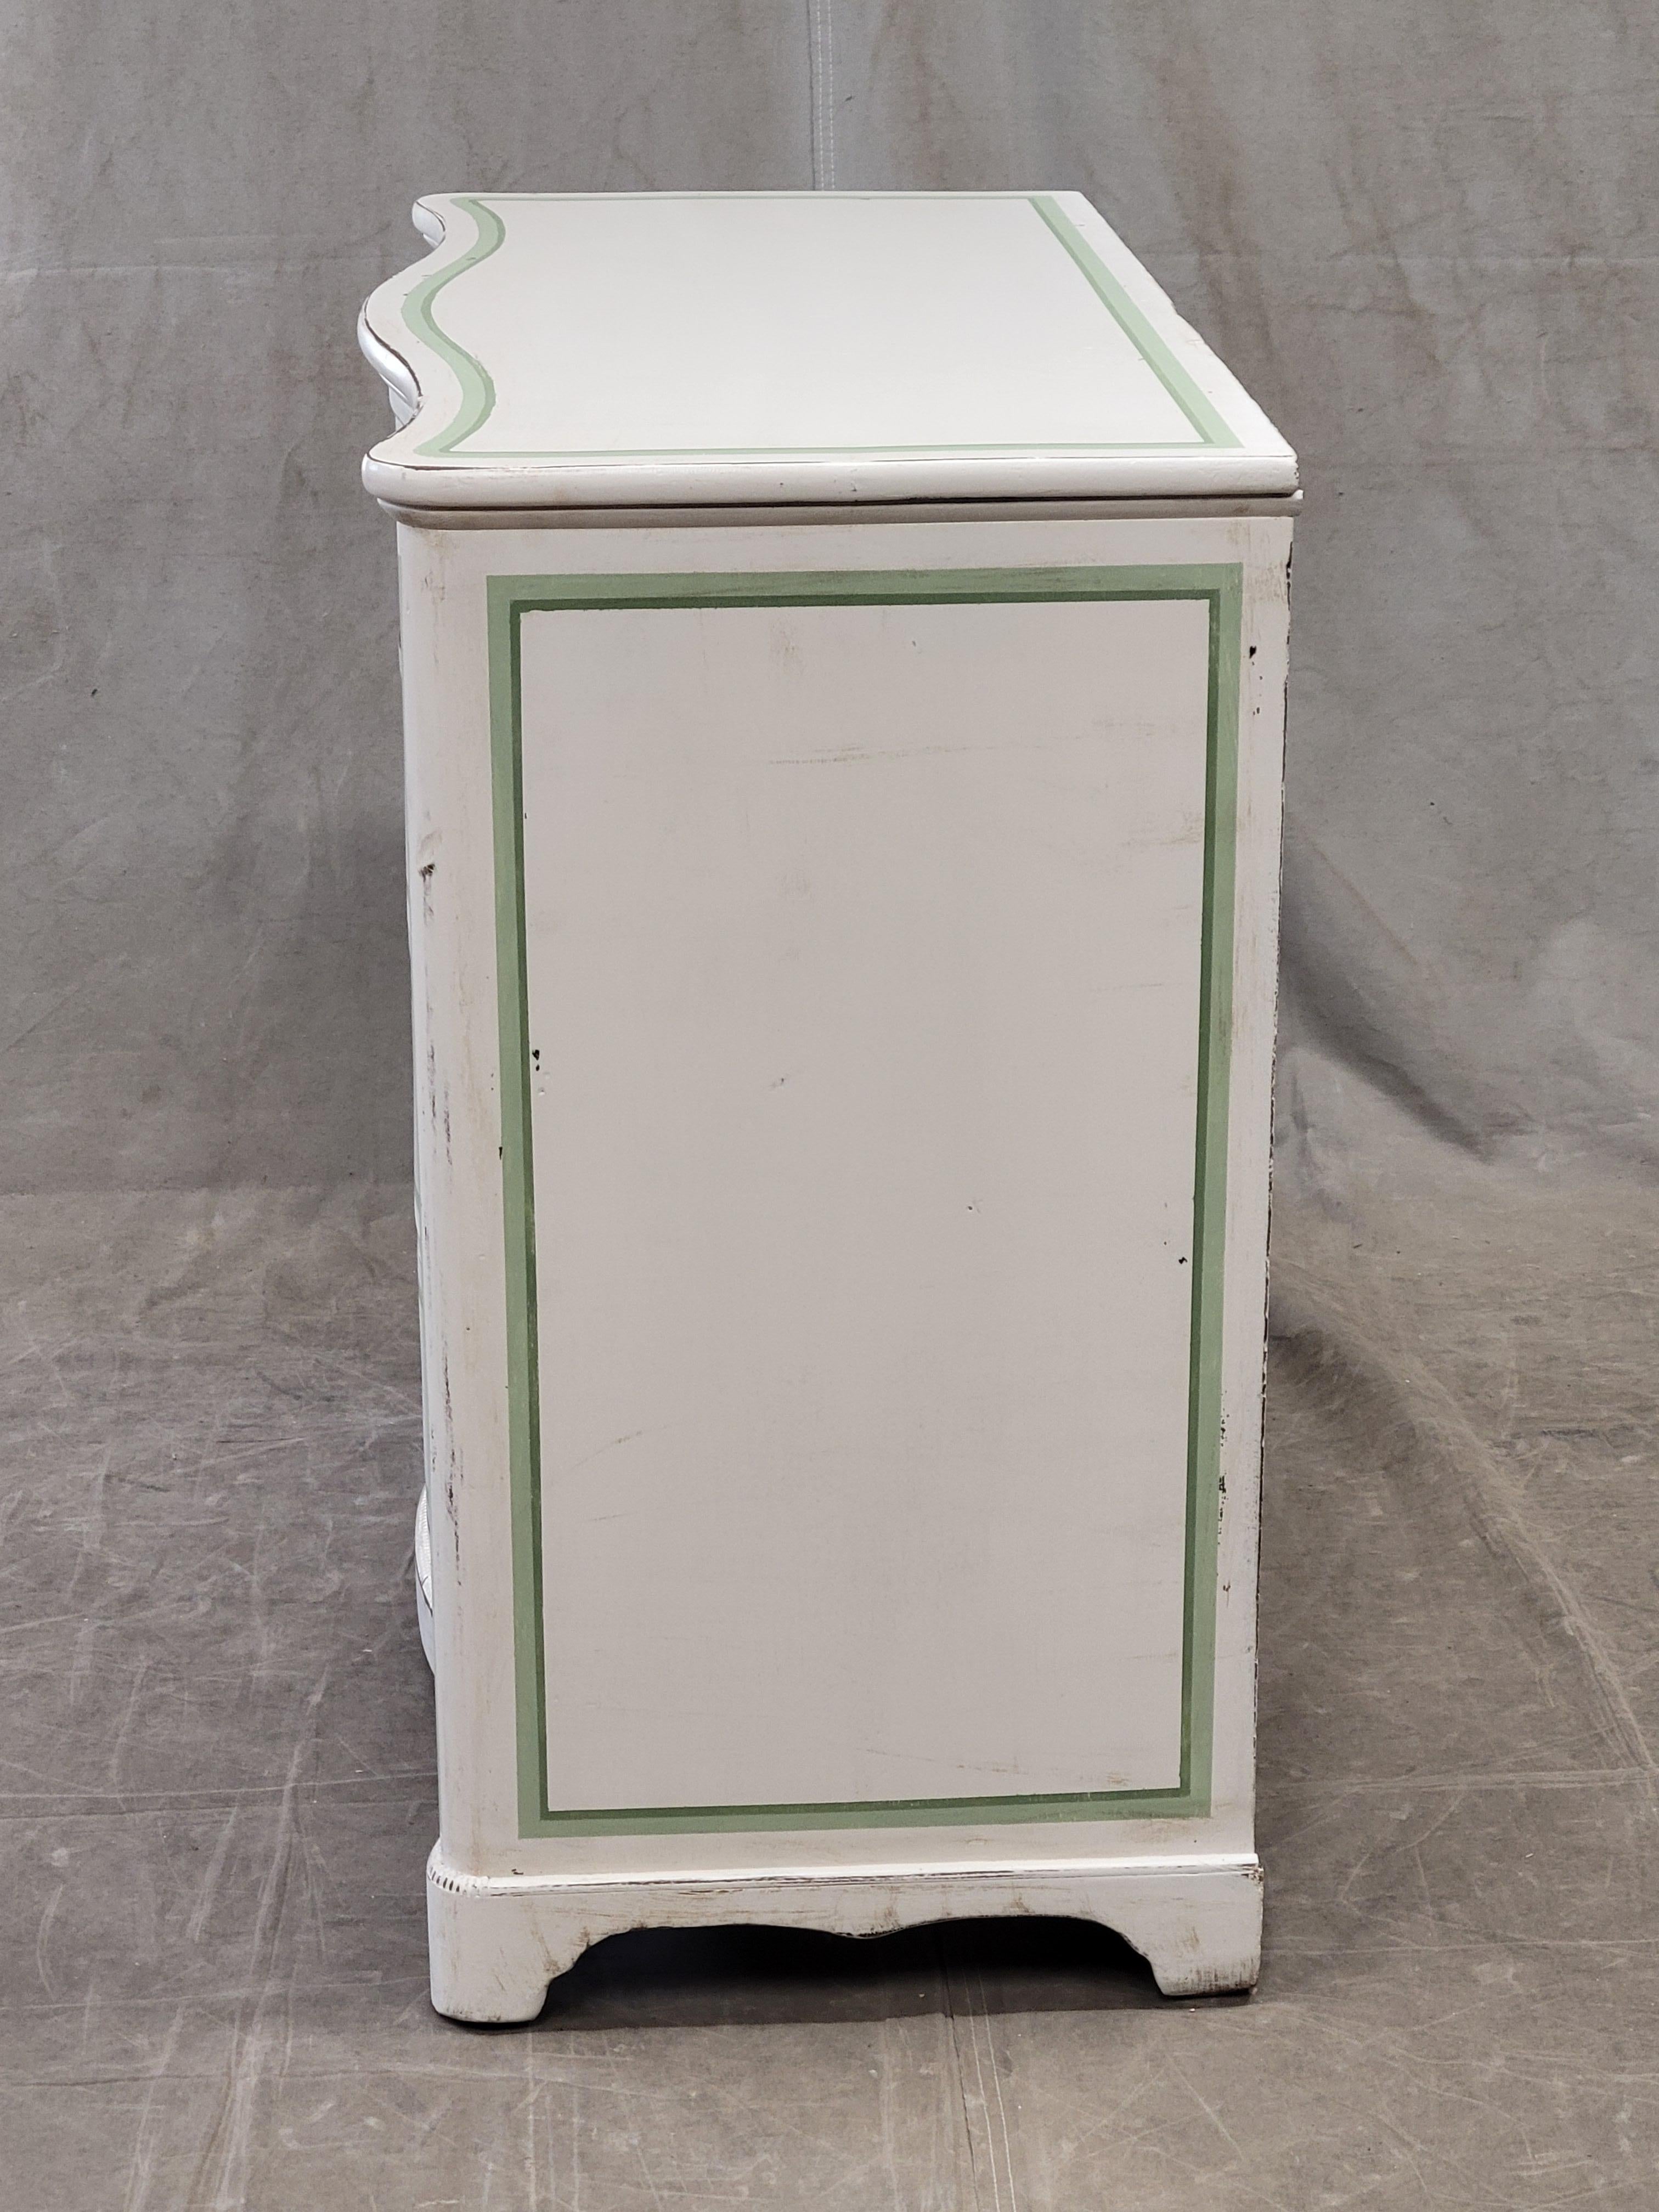 Antique Serpentine Front Dresser Painted White With Green French Line Motif For Sale 2